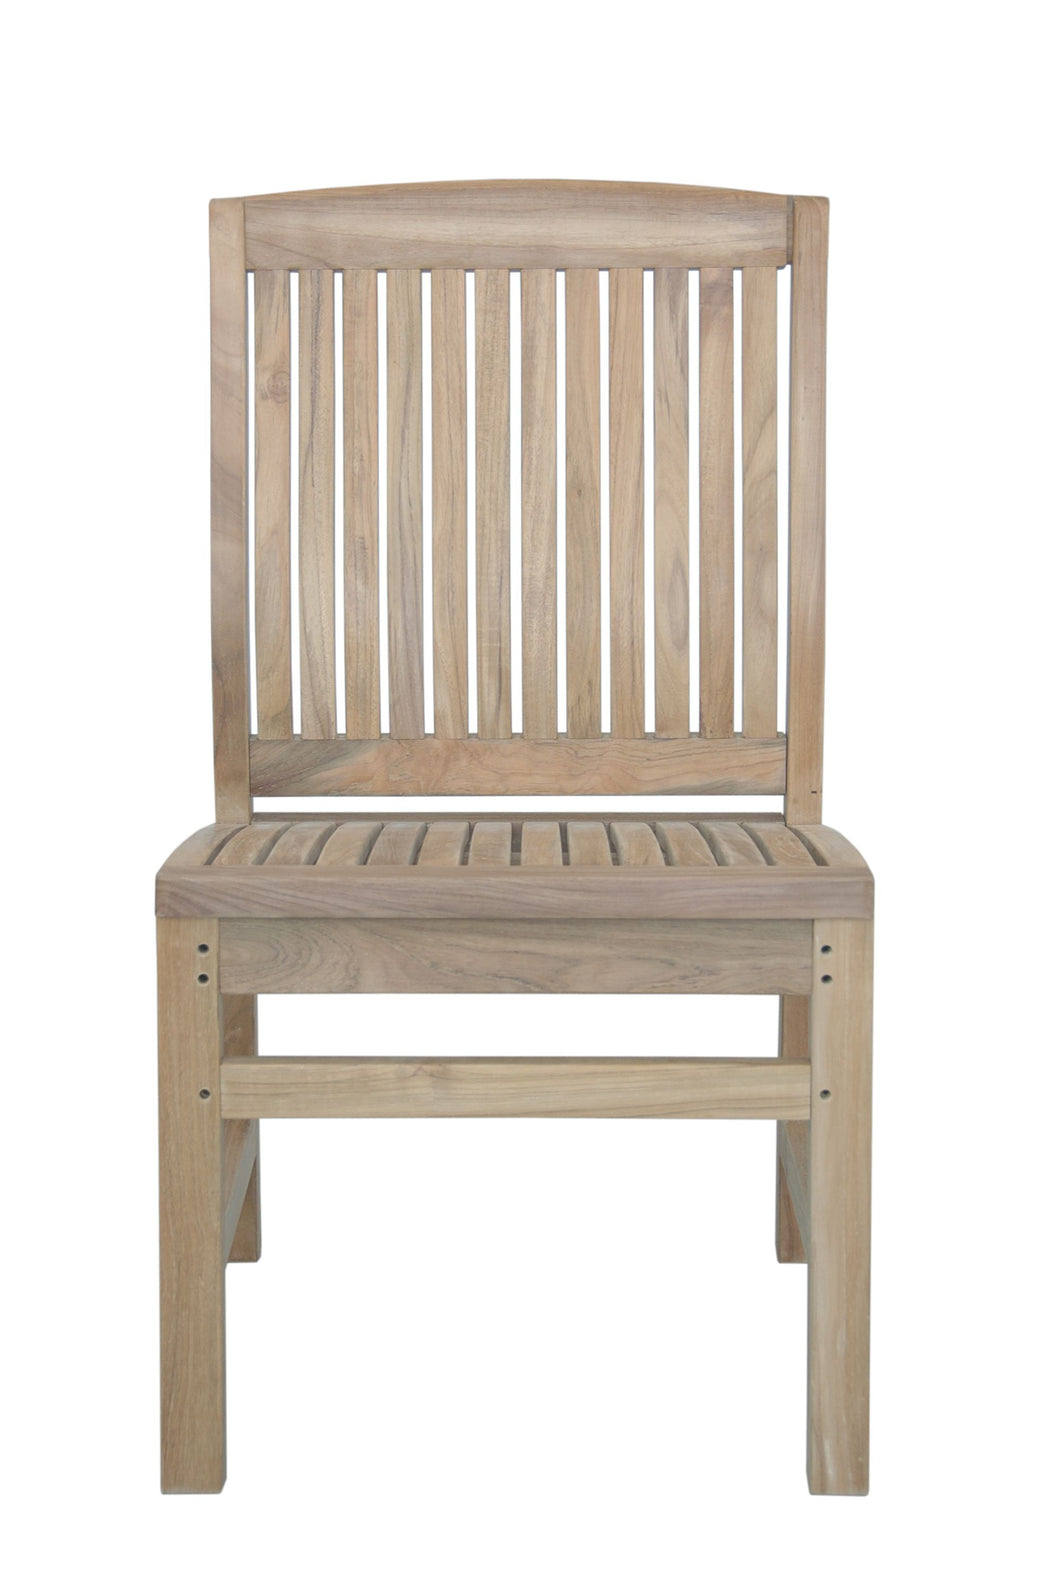 AndersonTeak - Sahara Non-Stacking Dining Chair